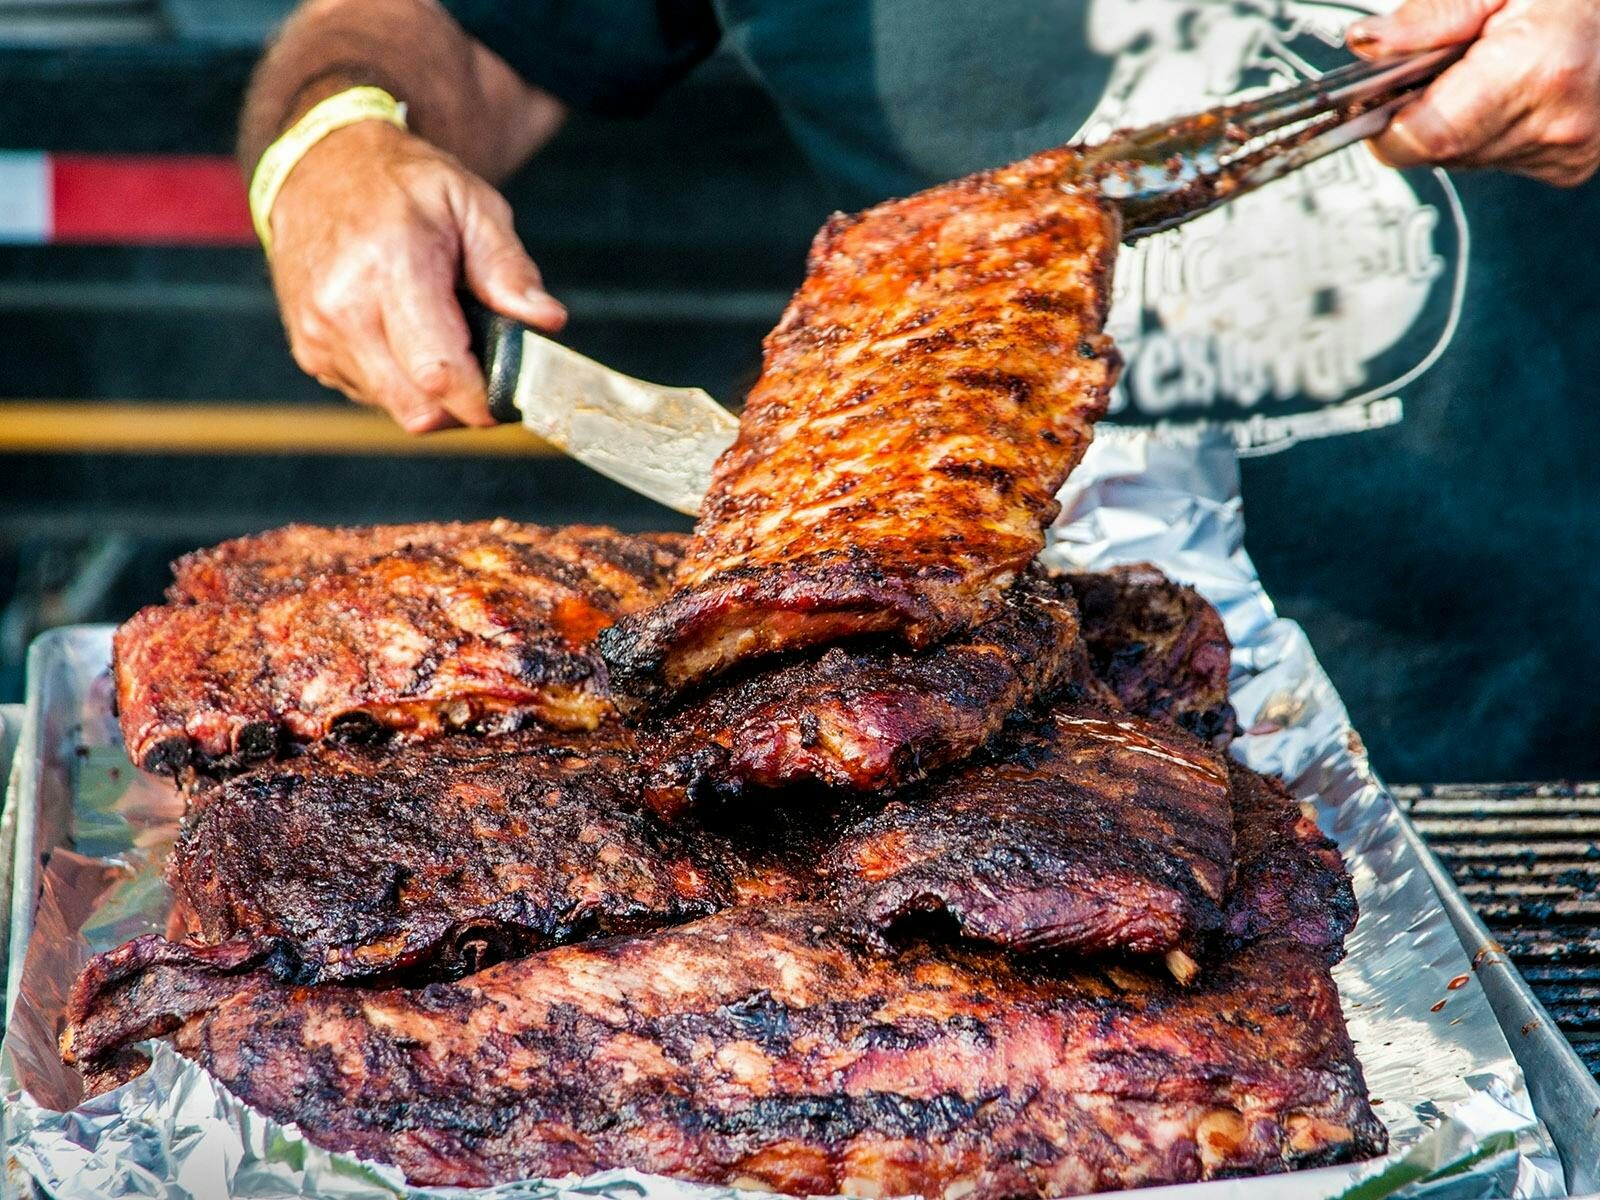 Competitor serving pork ribs